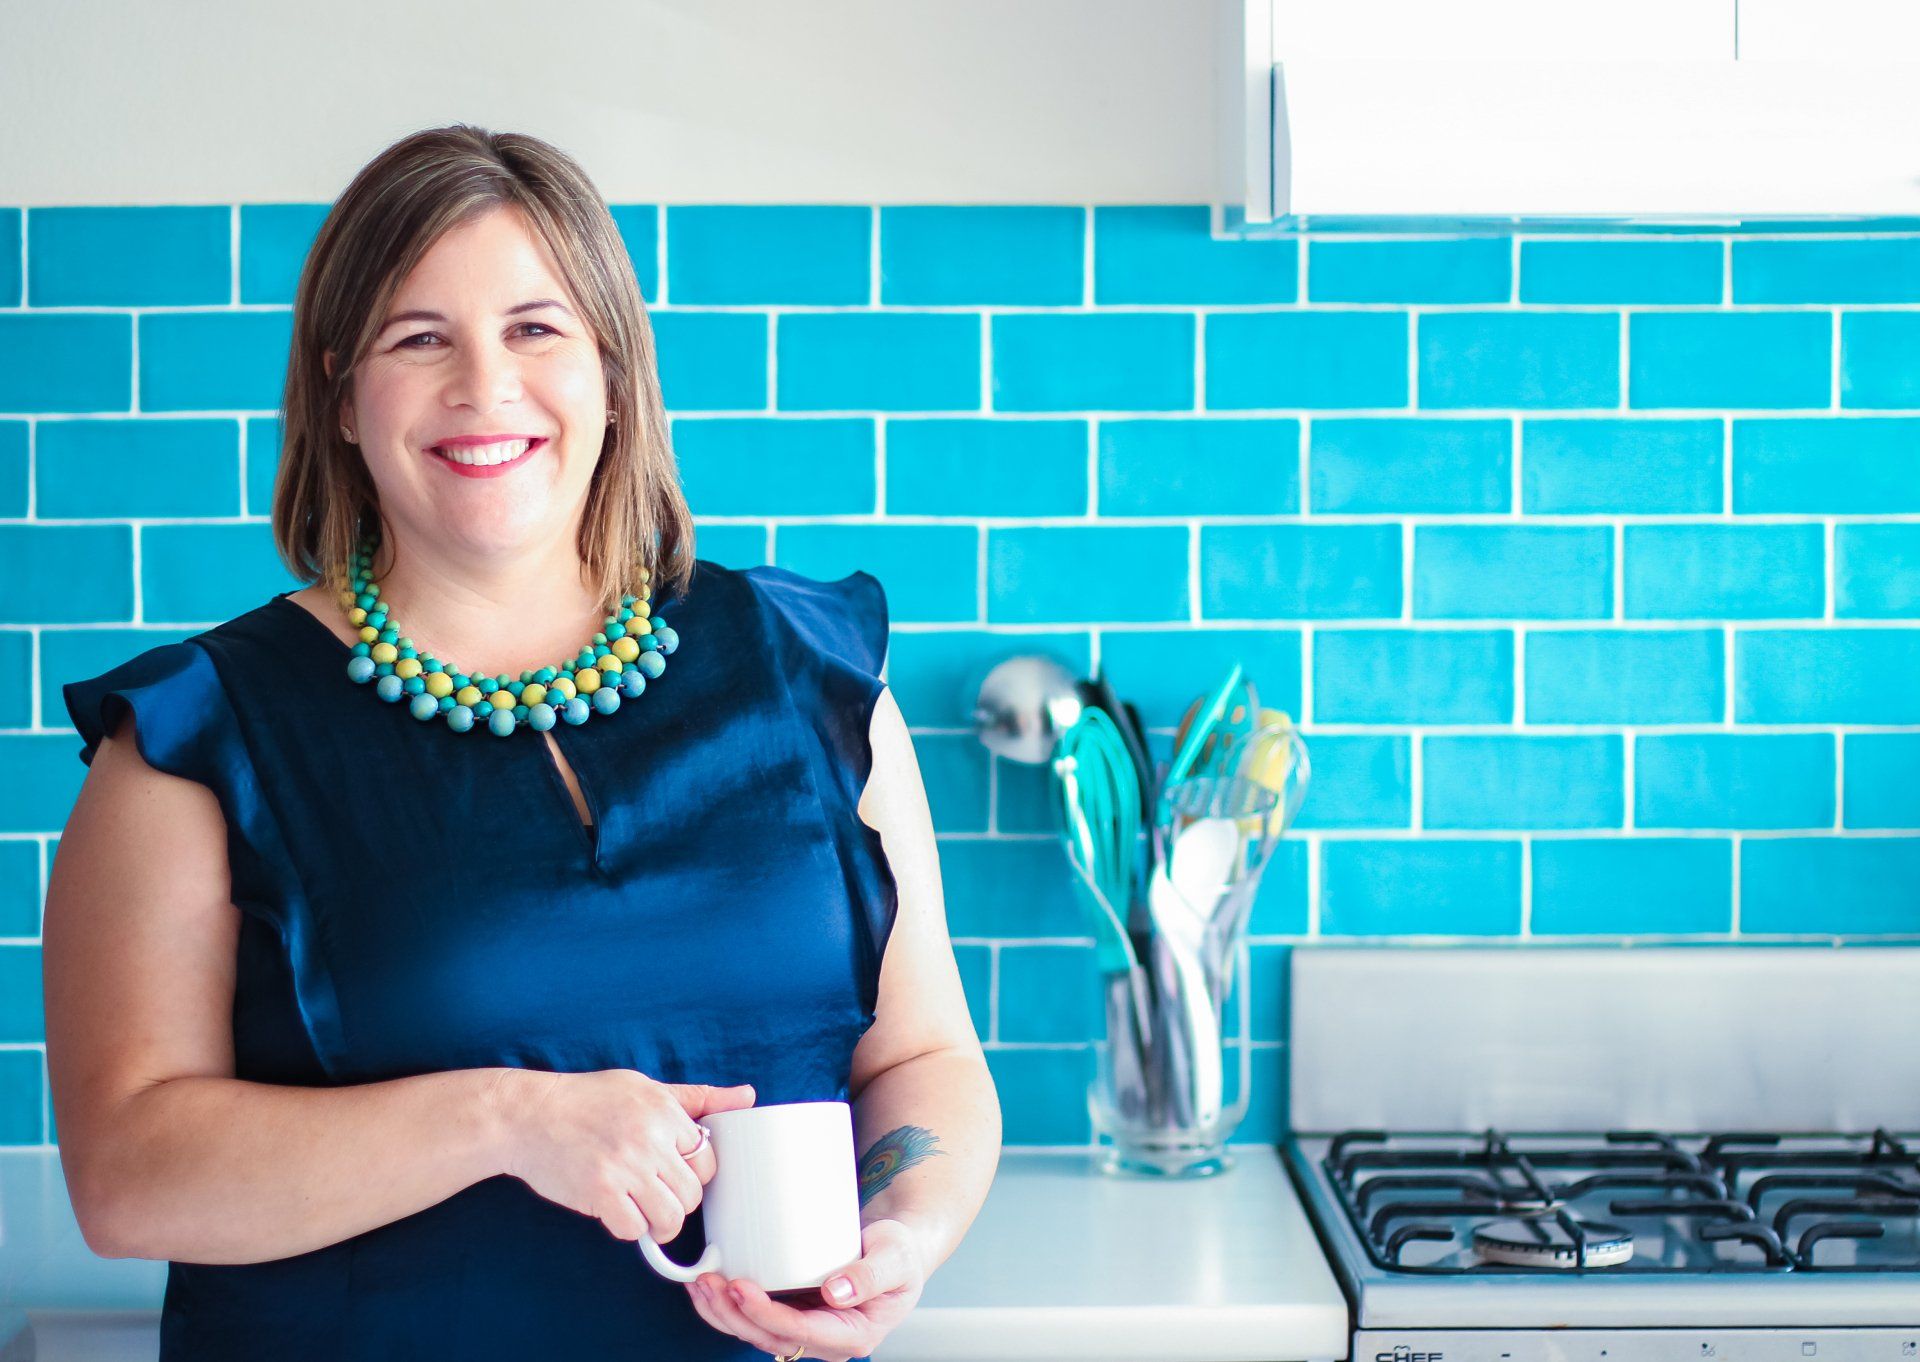 A woman with blue top in the kitchen with blue tiles in the background.